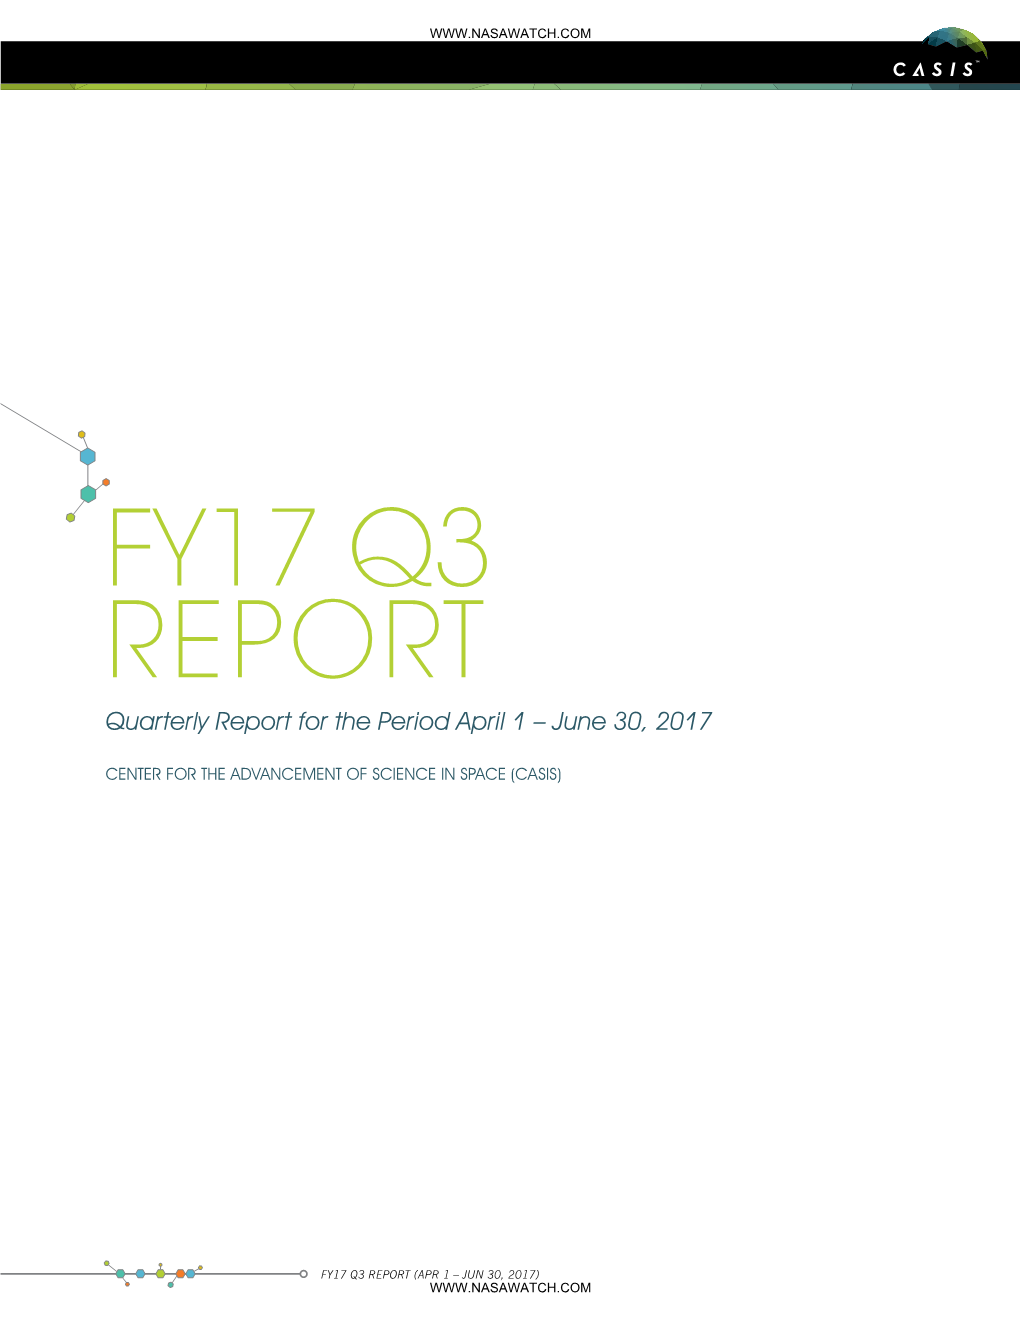 FY17 Q3 REPORT Quarterly Report for the Period April 1 – June 30, 2017